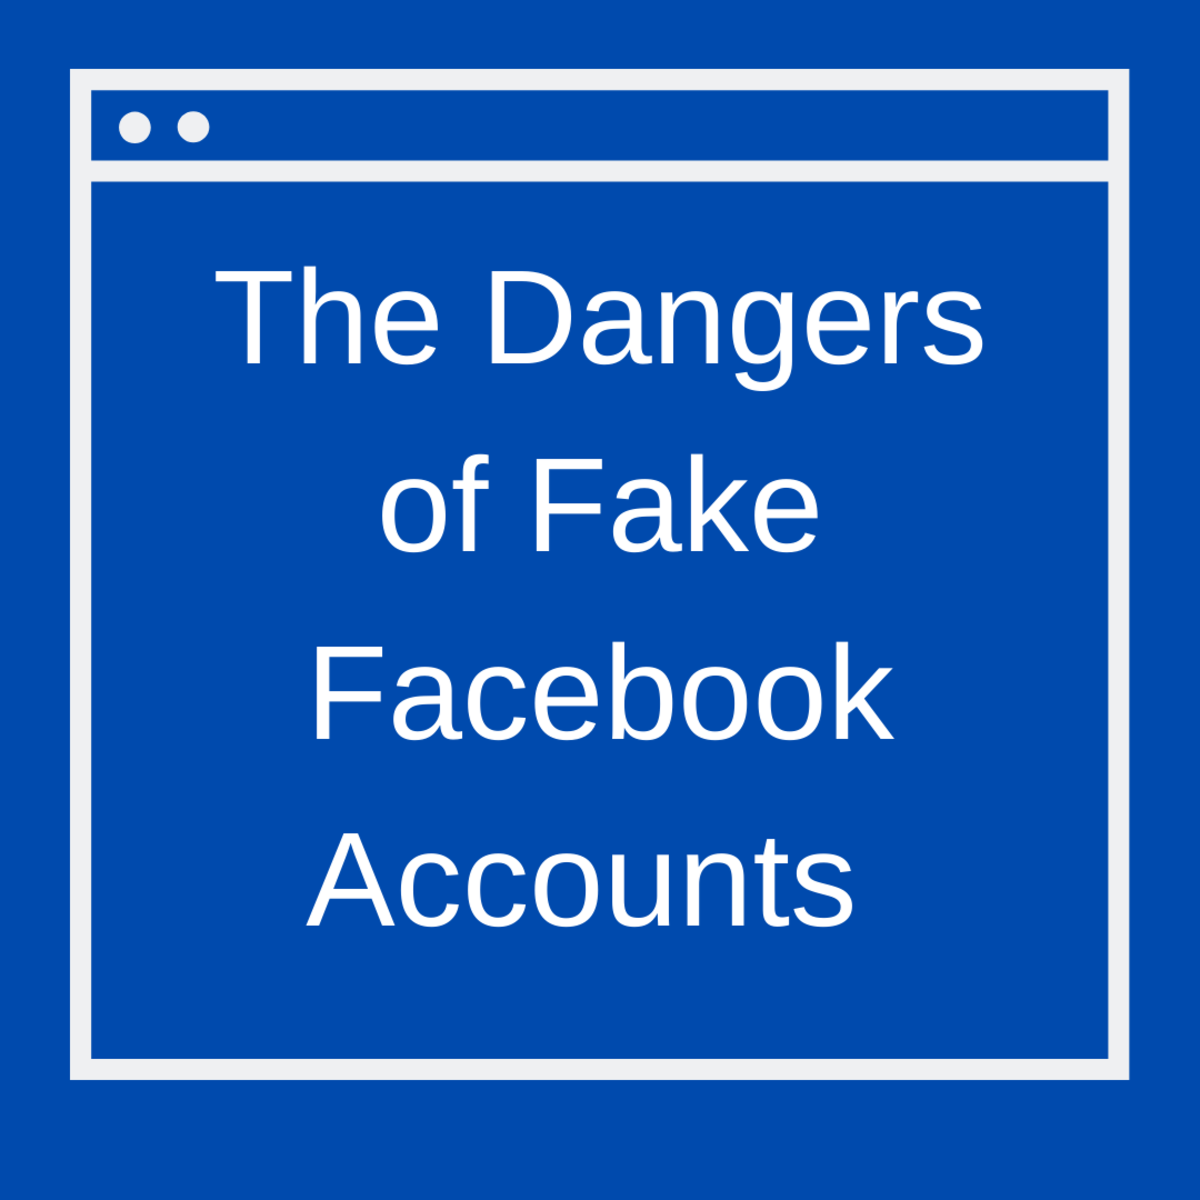 There are many legal issues associated with fake accounts on Facebook. You must know the dangers before you decide to make a fake account. 